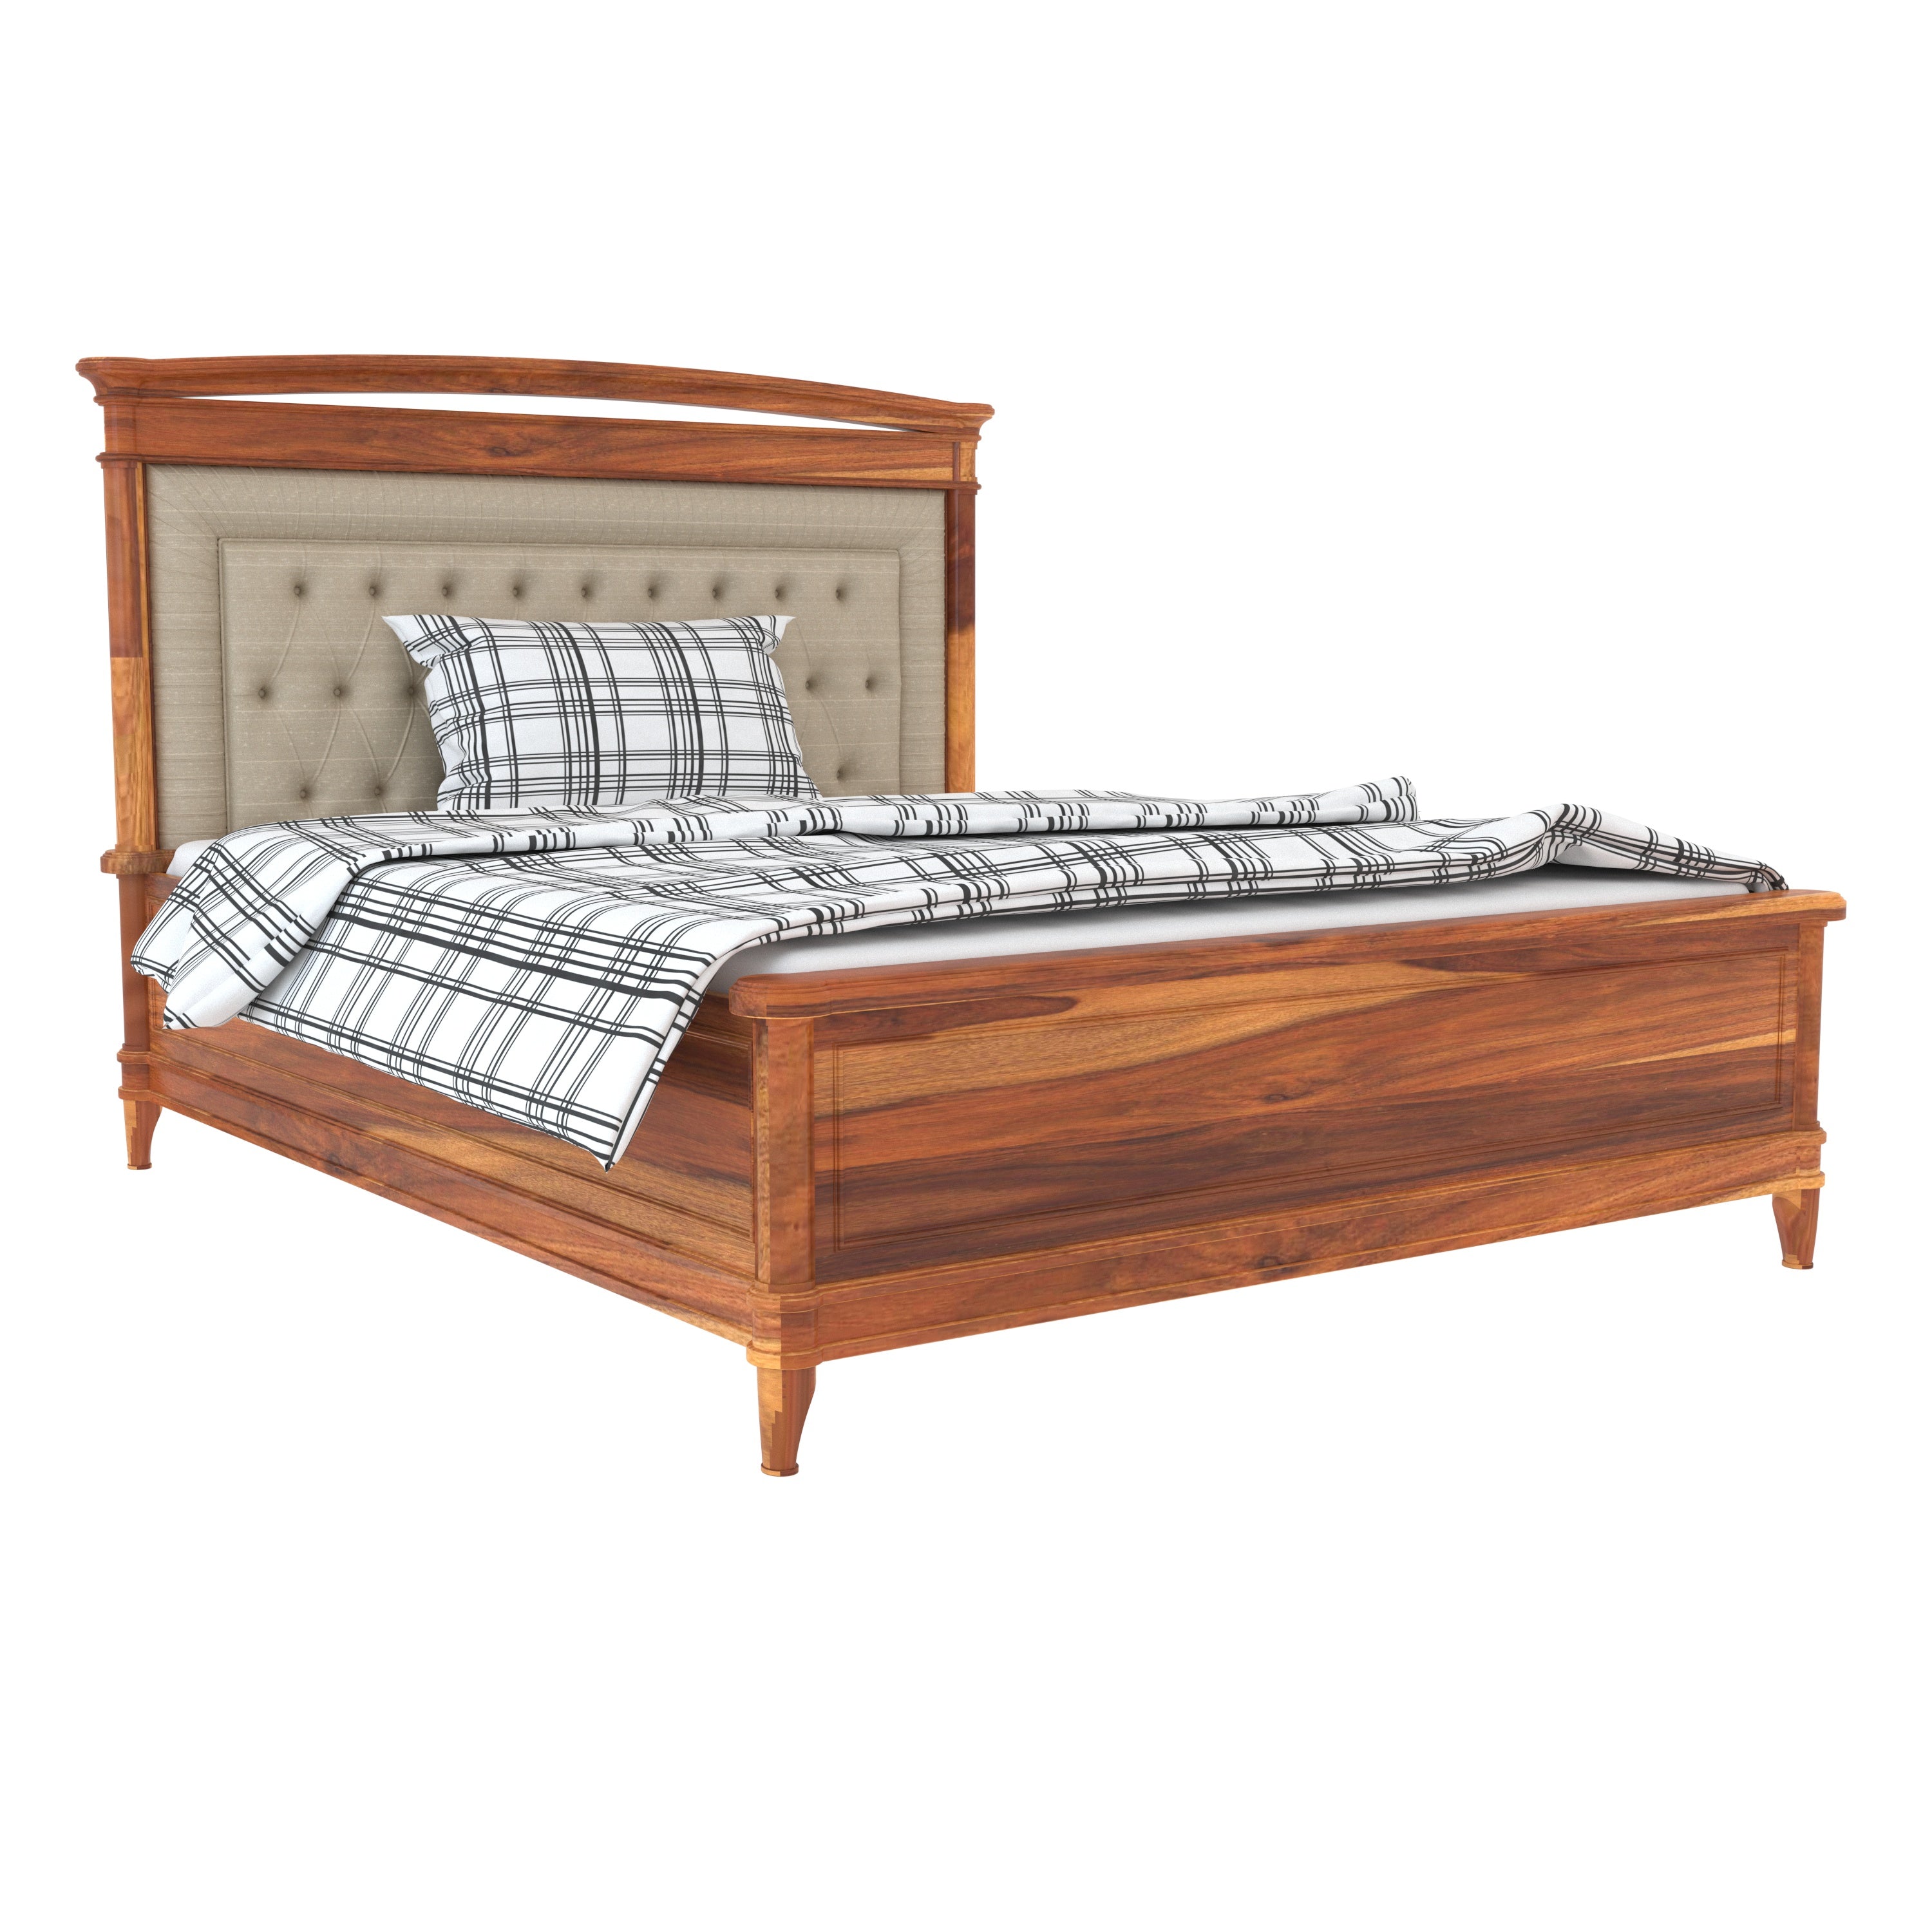 Classic Rustic Natural Indian Handmade Wooden Bed for Home Bedroom Furniture Sets